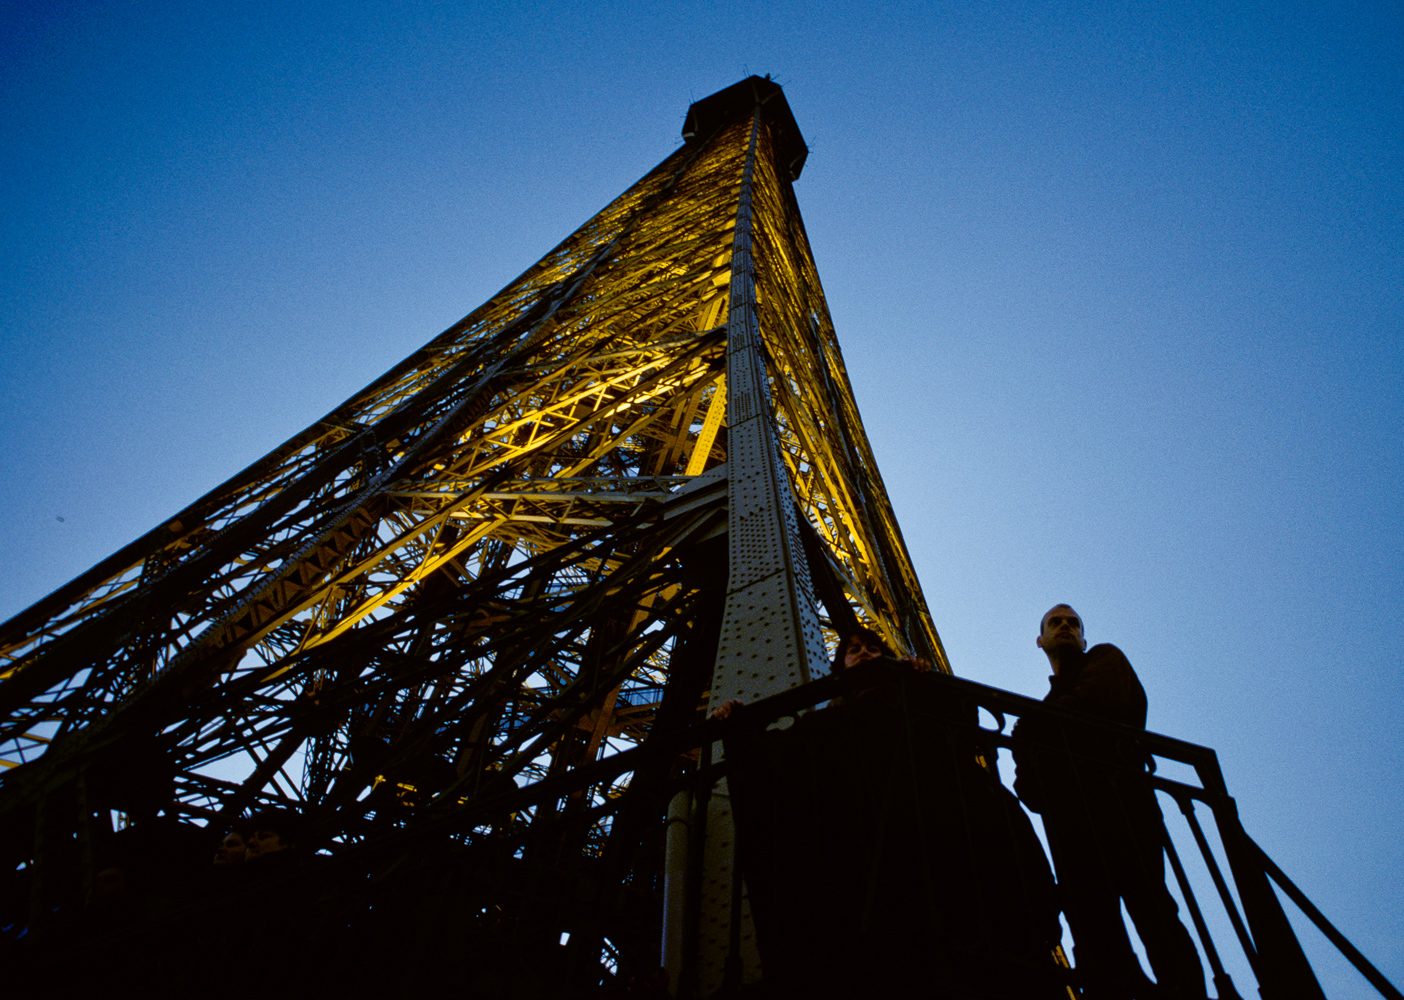 Two people standing on the platform of the lit up Eiffel Tower.